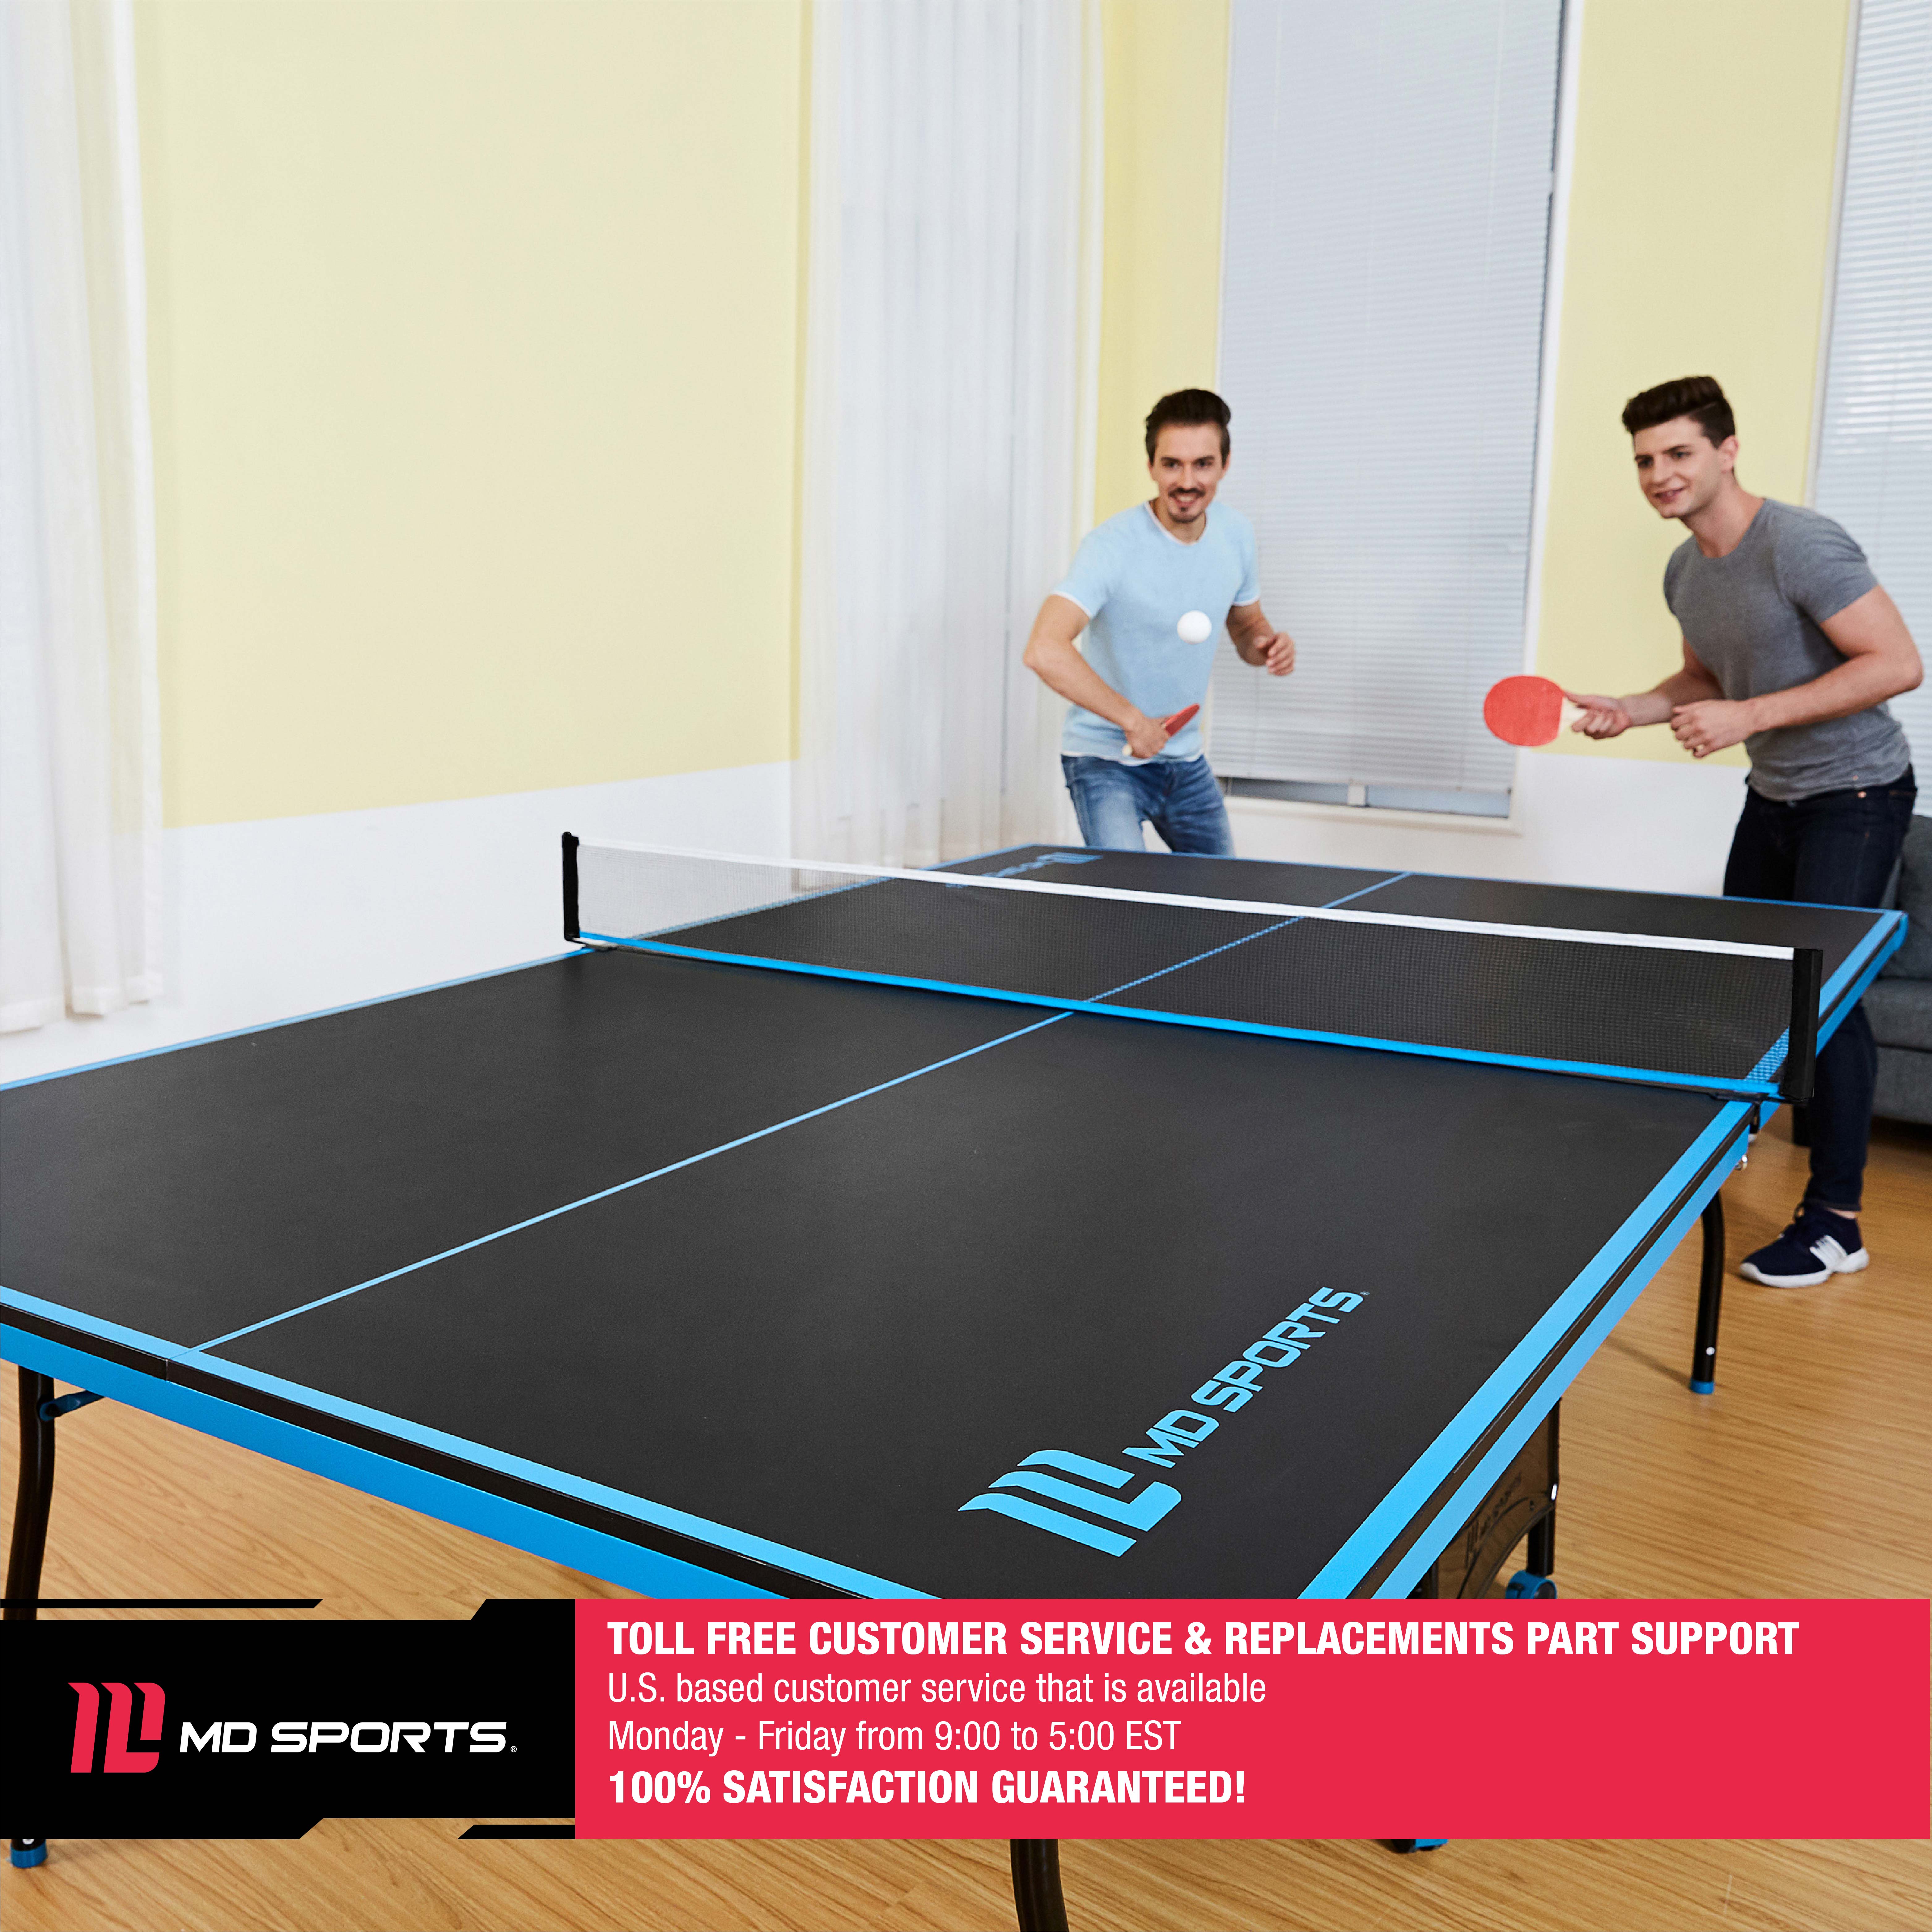 MD Sports Official Size Table Tennis Table - image 11 of 13